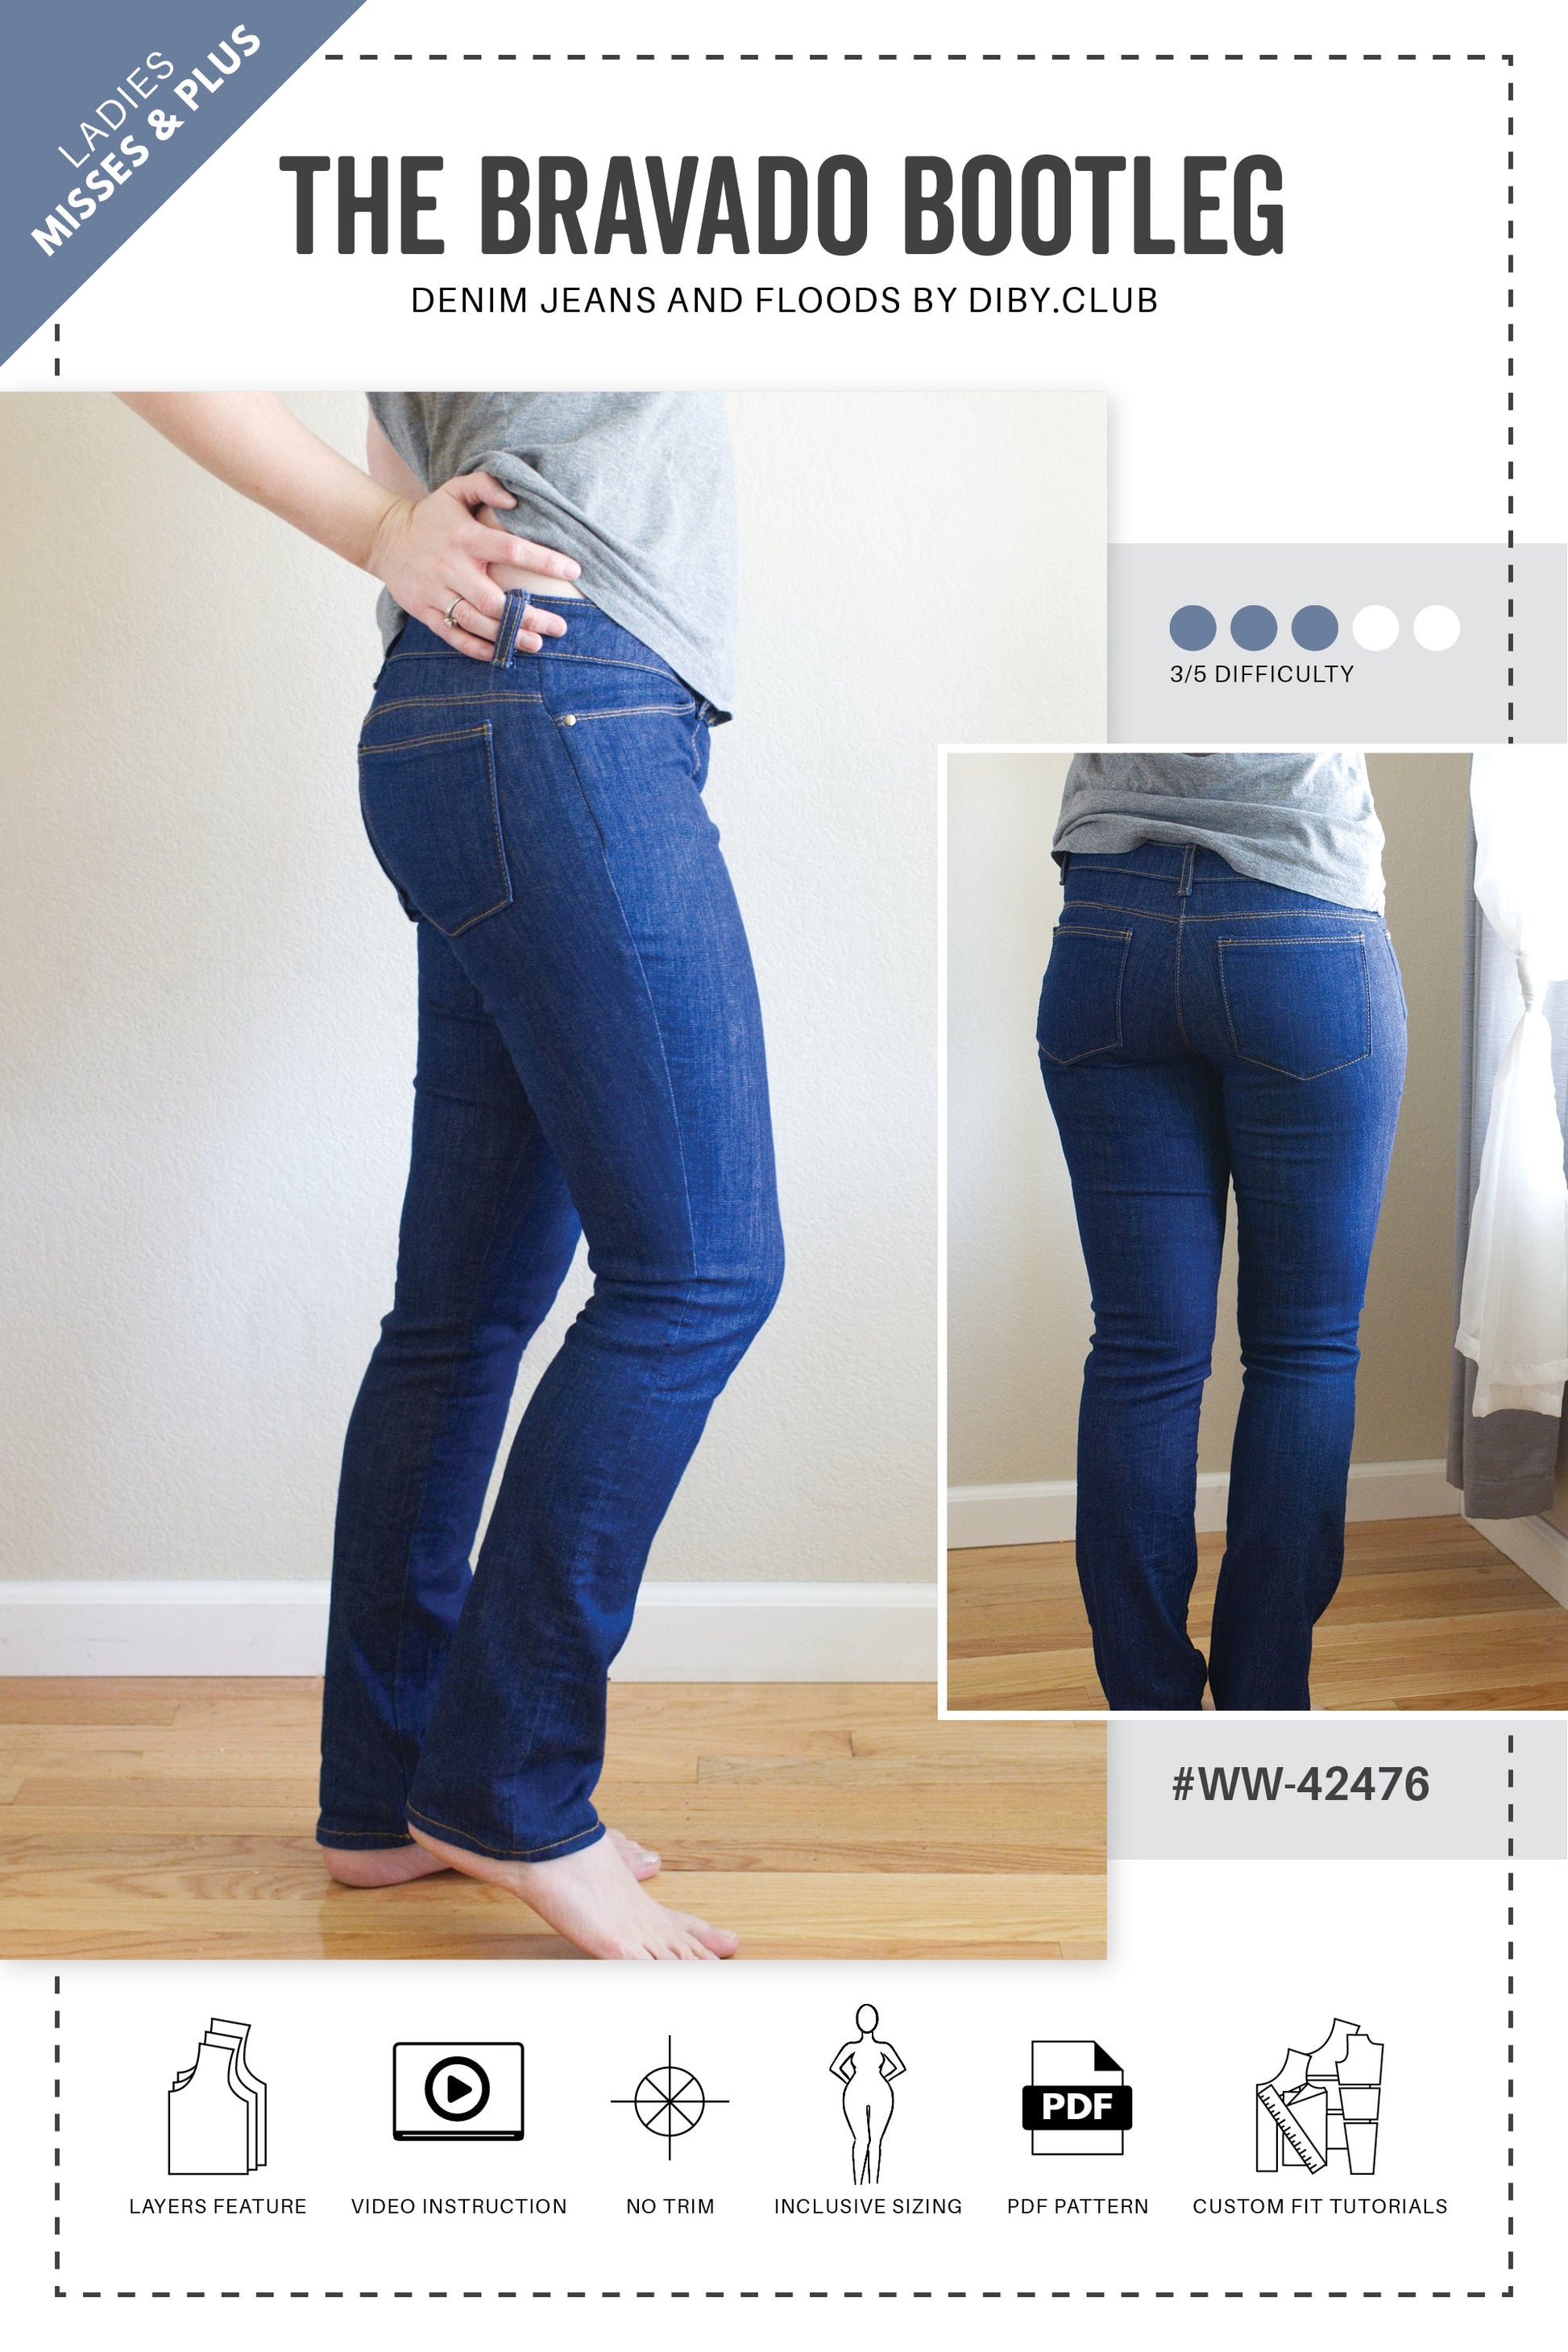 Cover of DIBY Club Bravado Bootleg Pattern Instruction Book showing side and back view of jeans